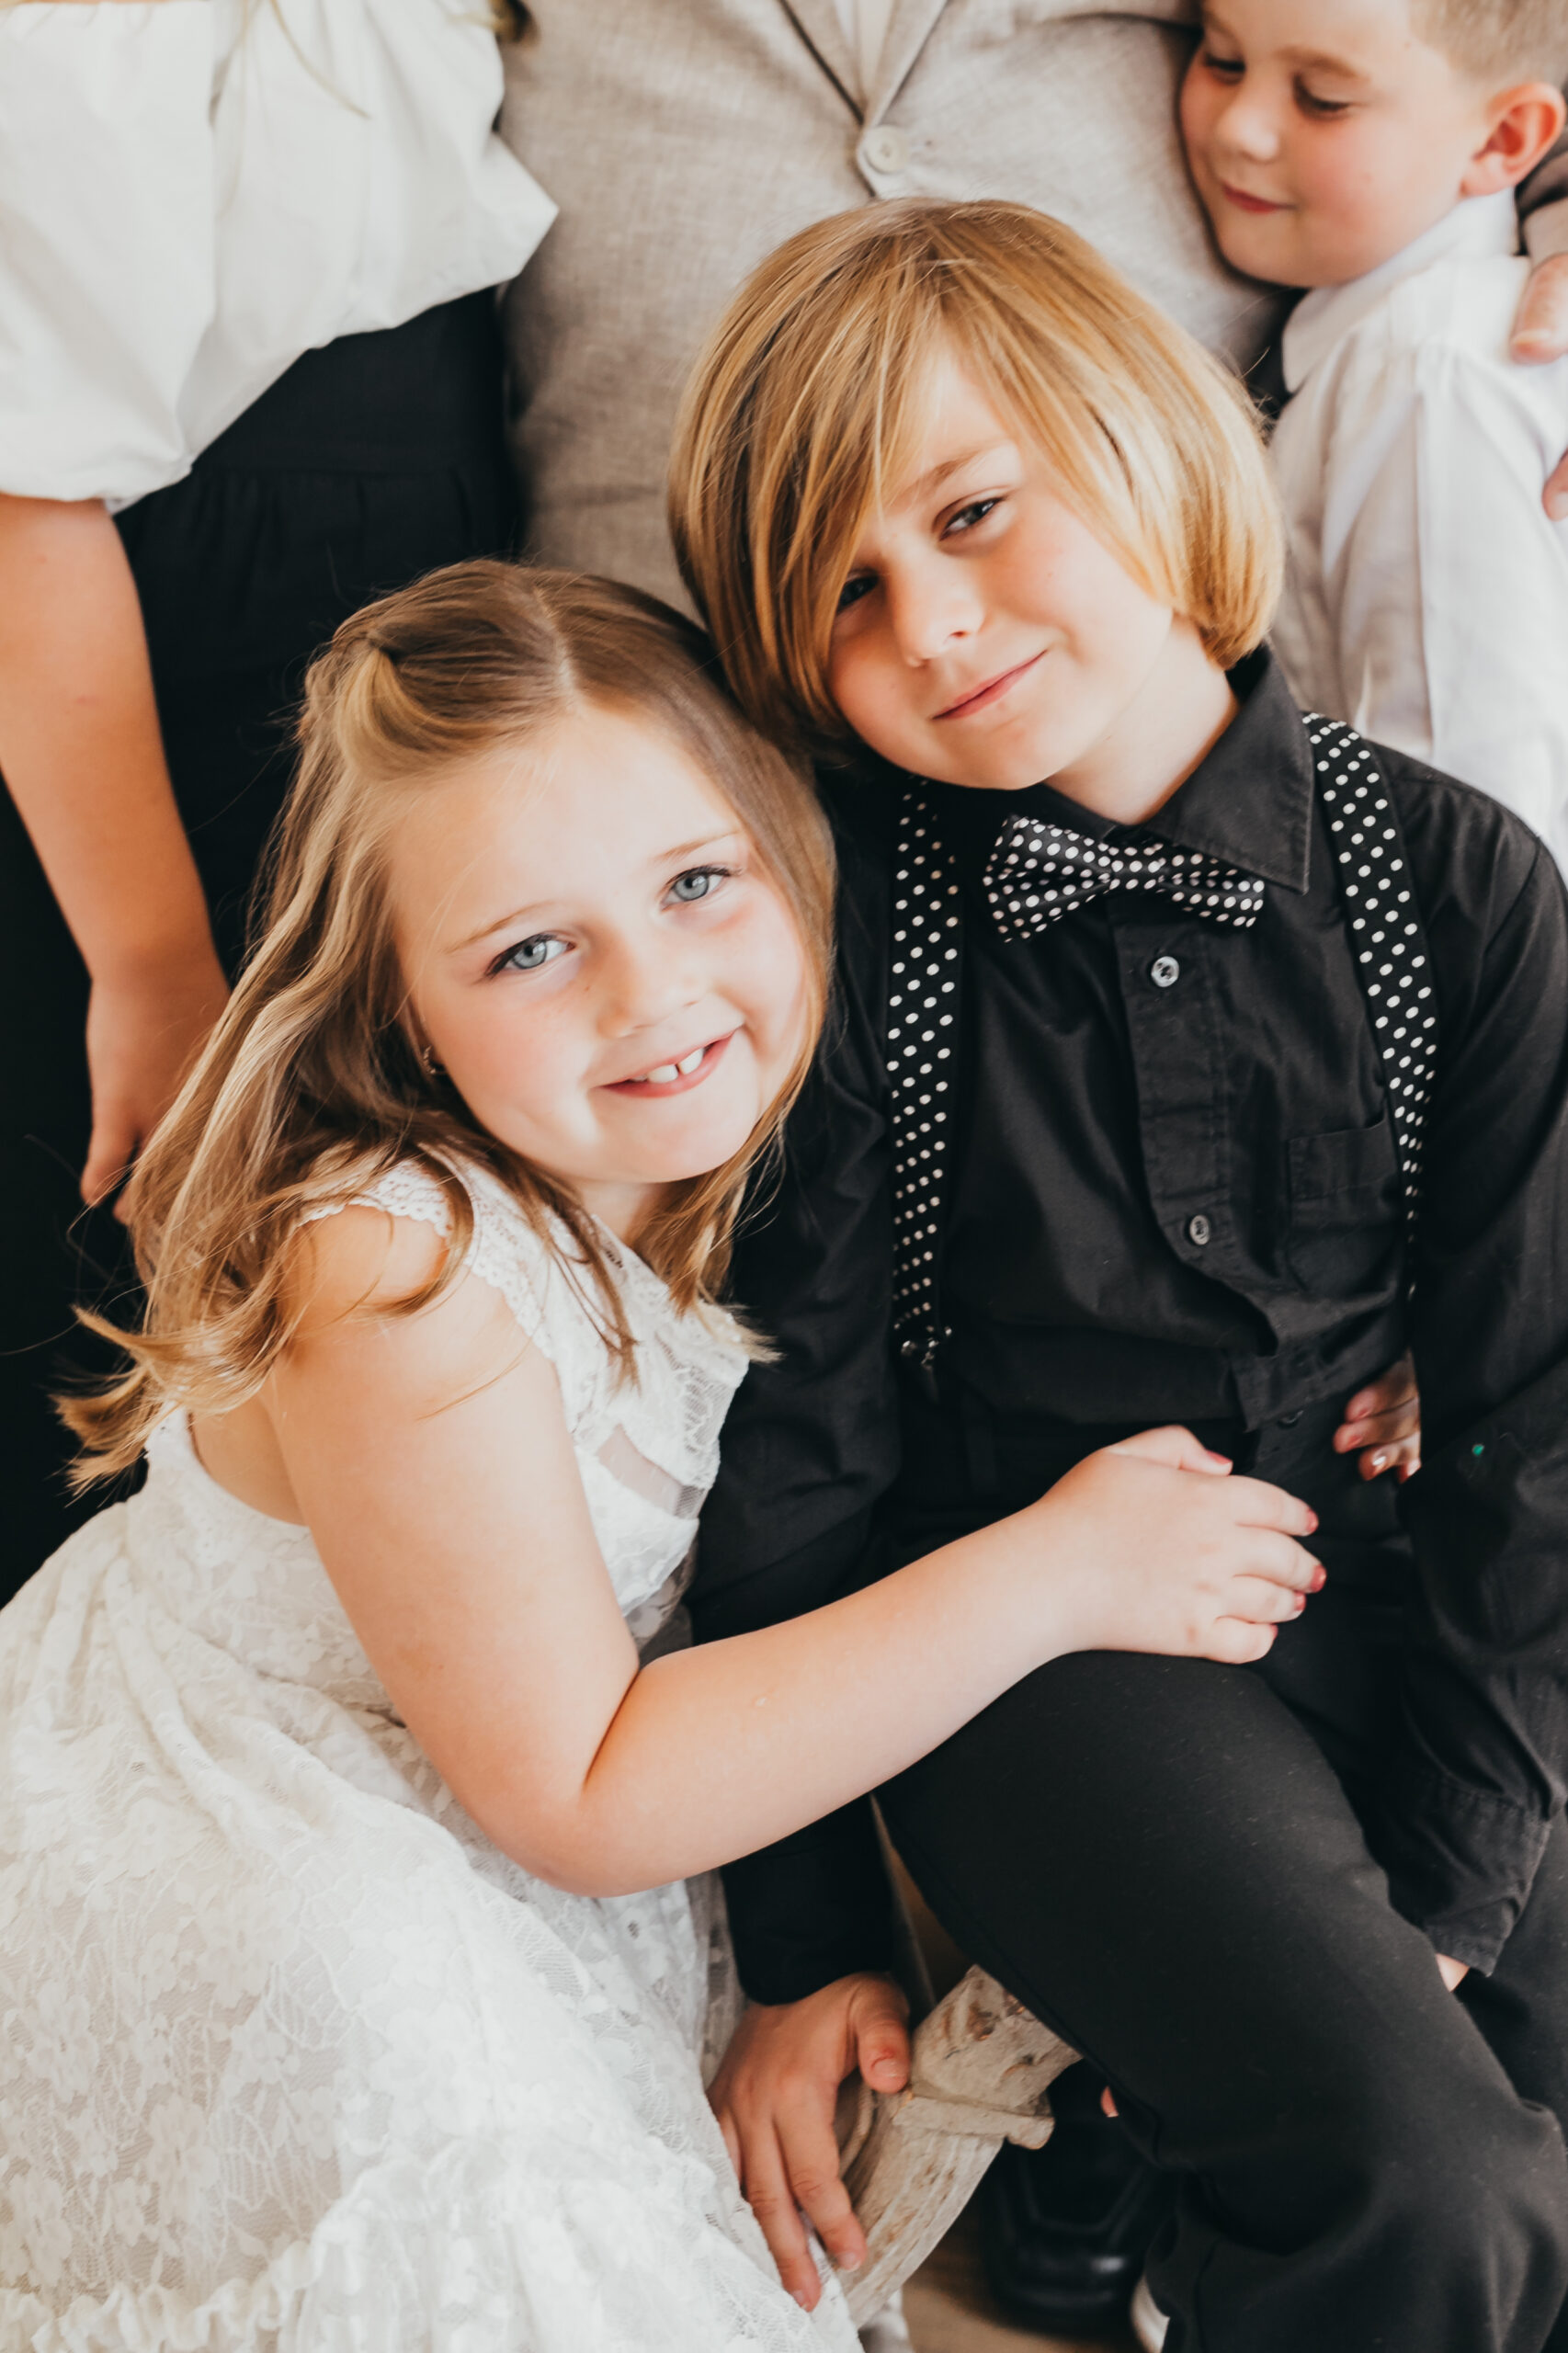 cousins hug on each other during photo session, wearing black suit and she wears a white dress.